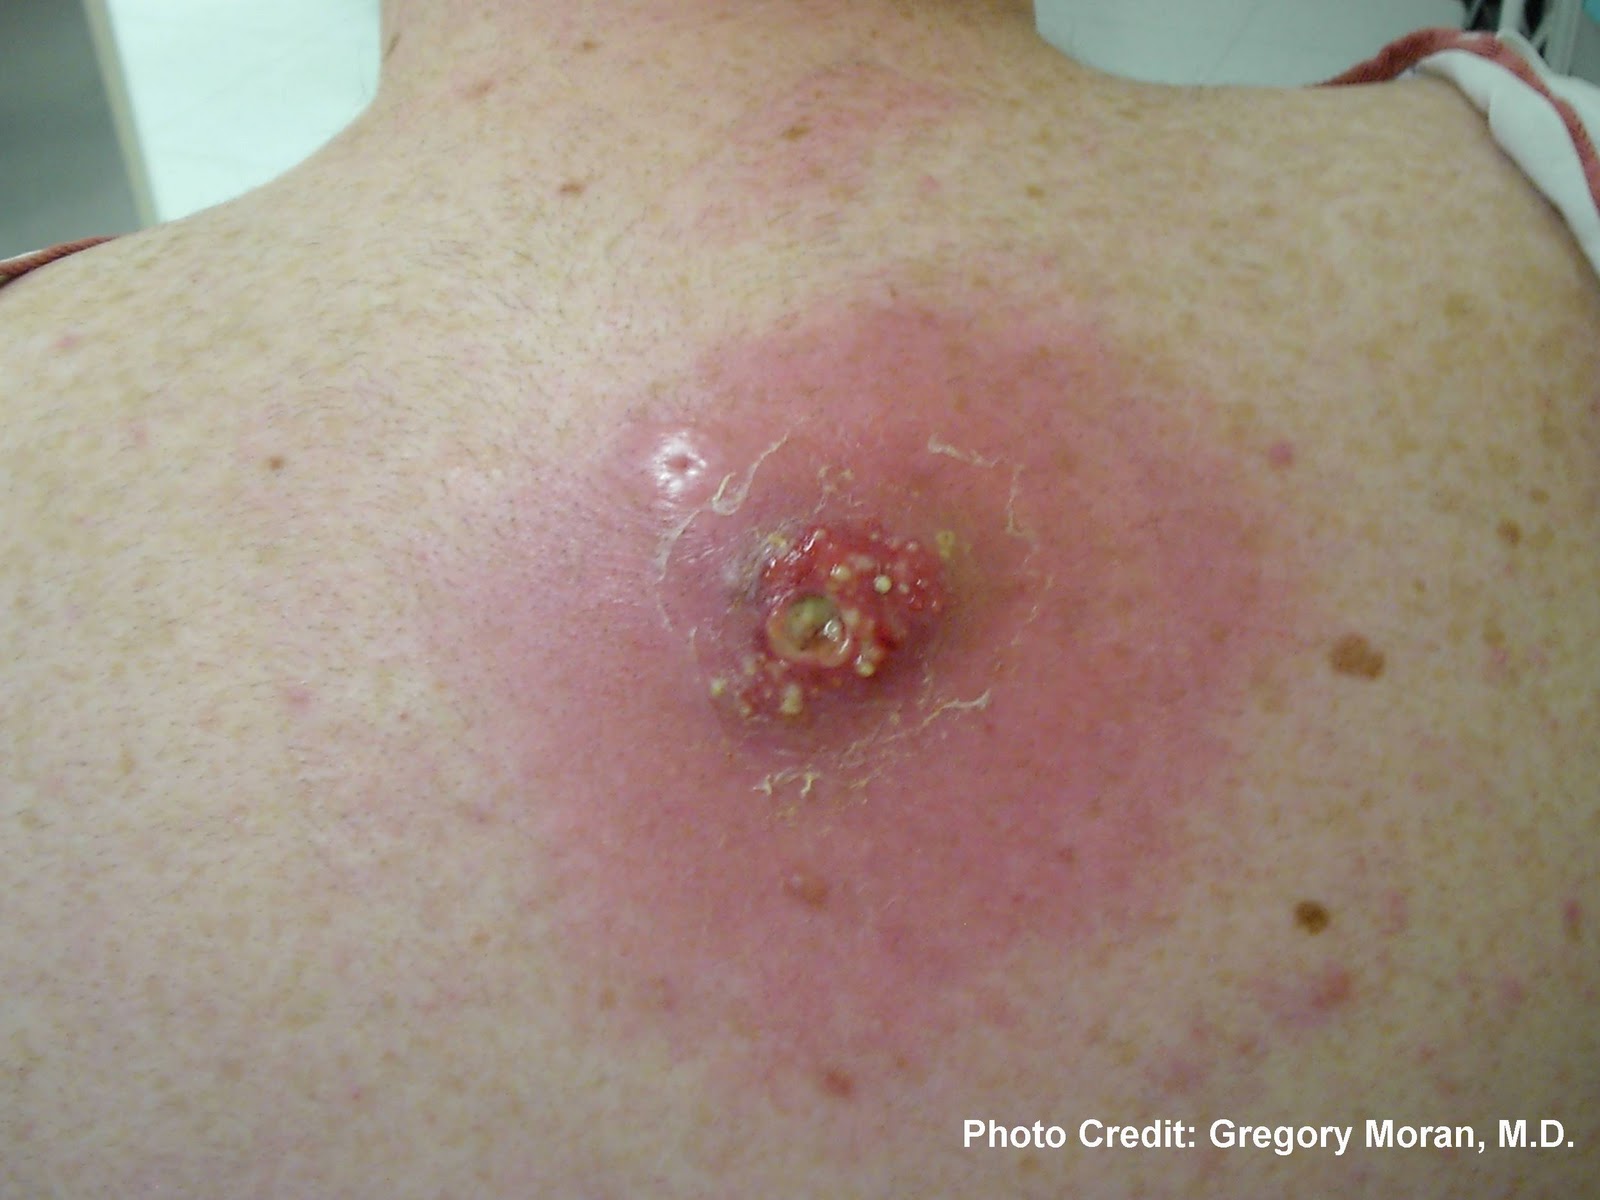 Slideshow: Boils and the Skin - WebMD